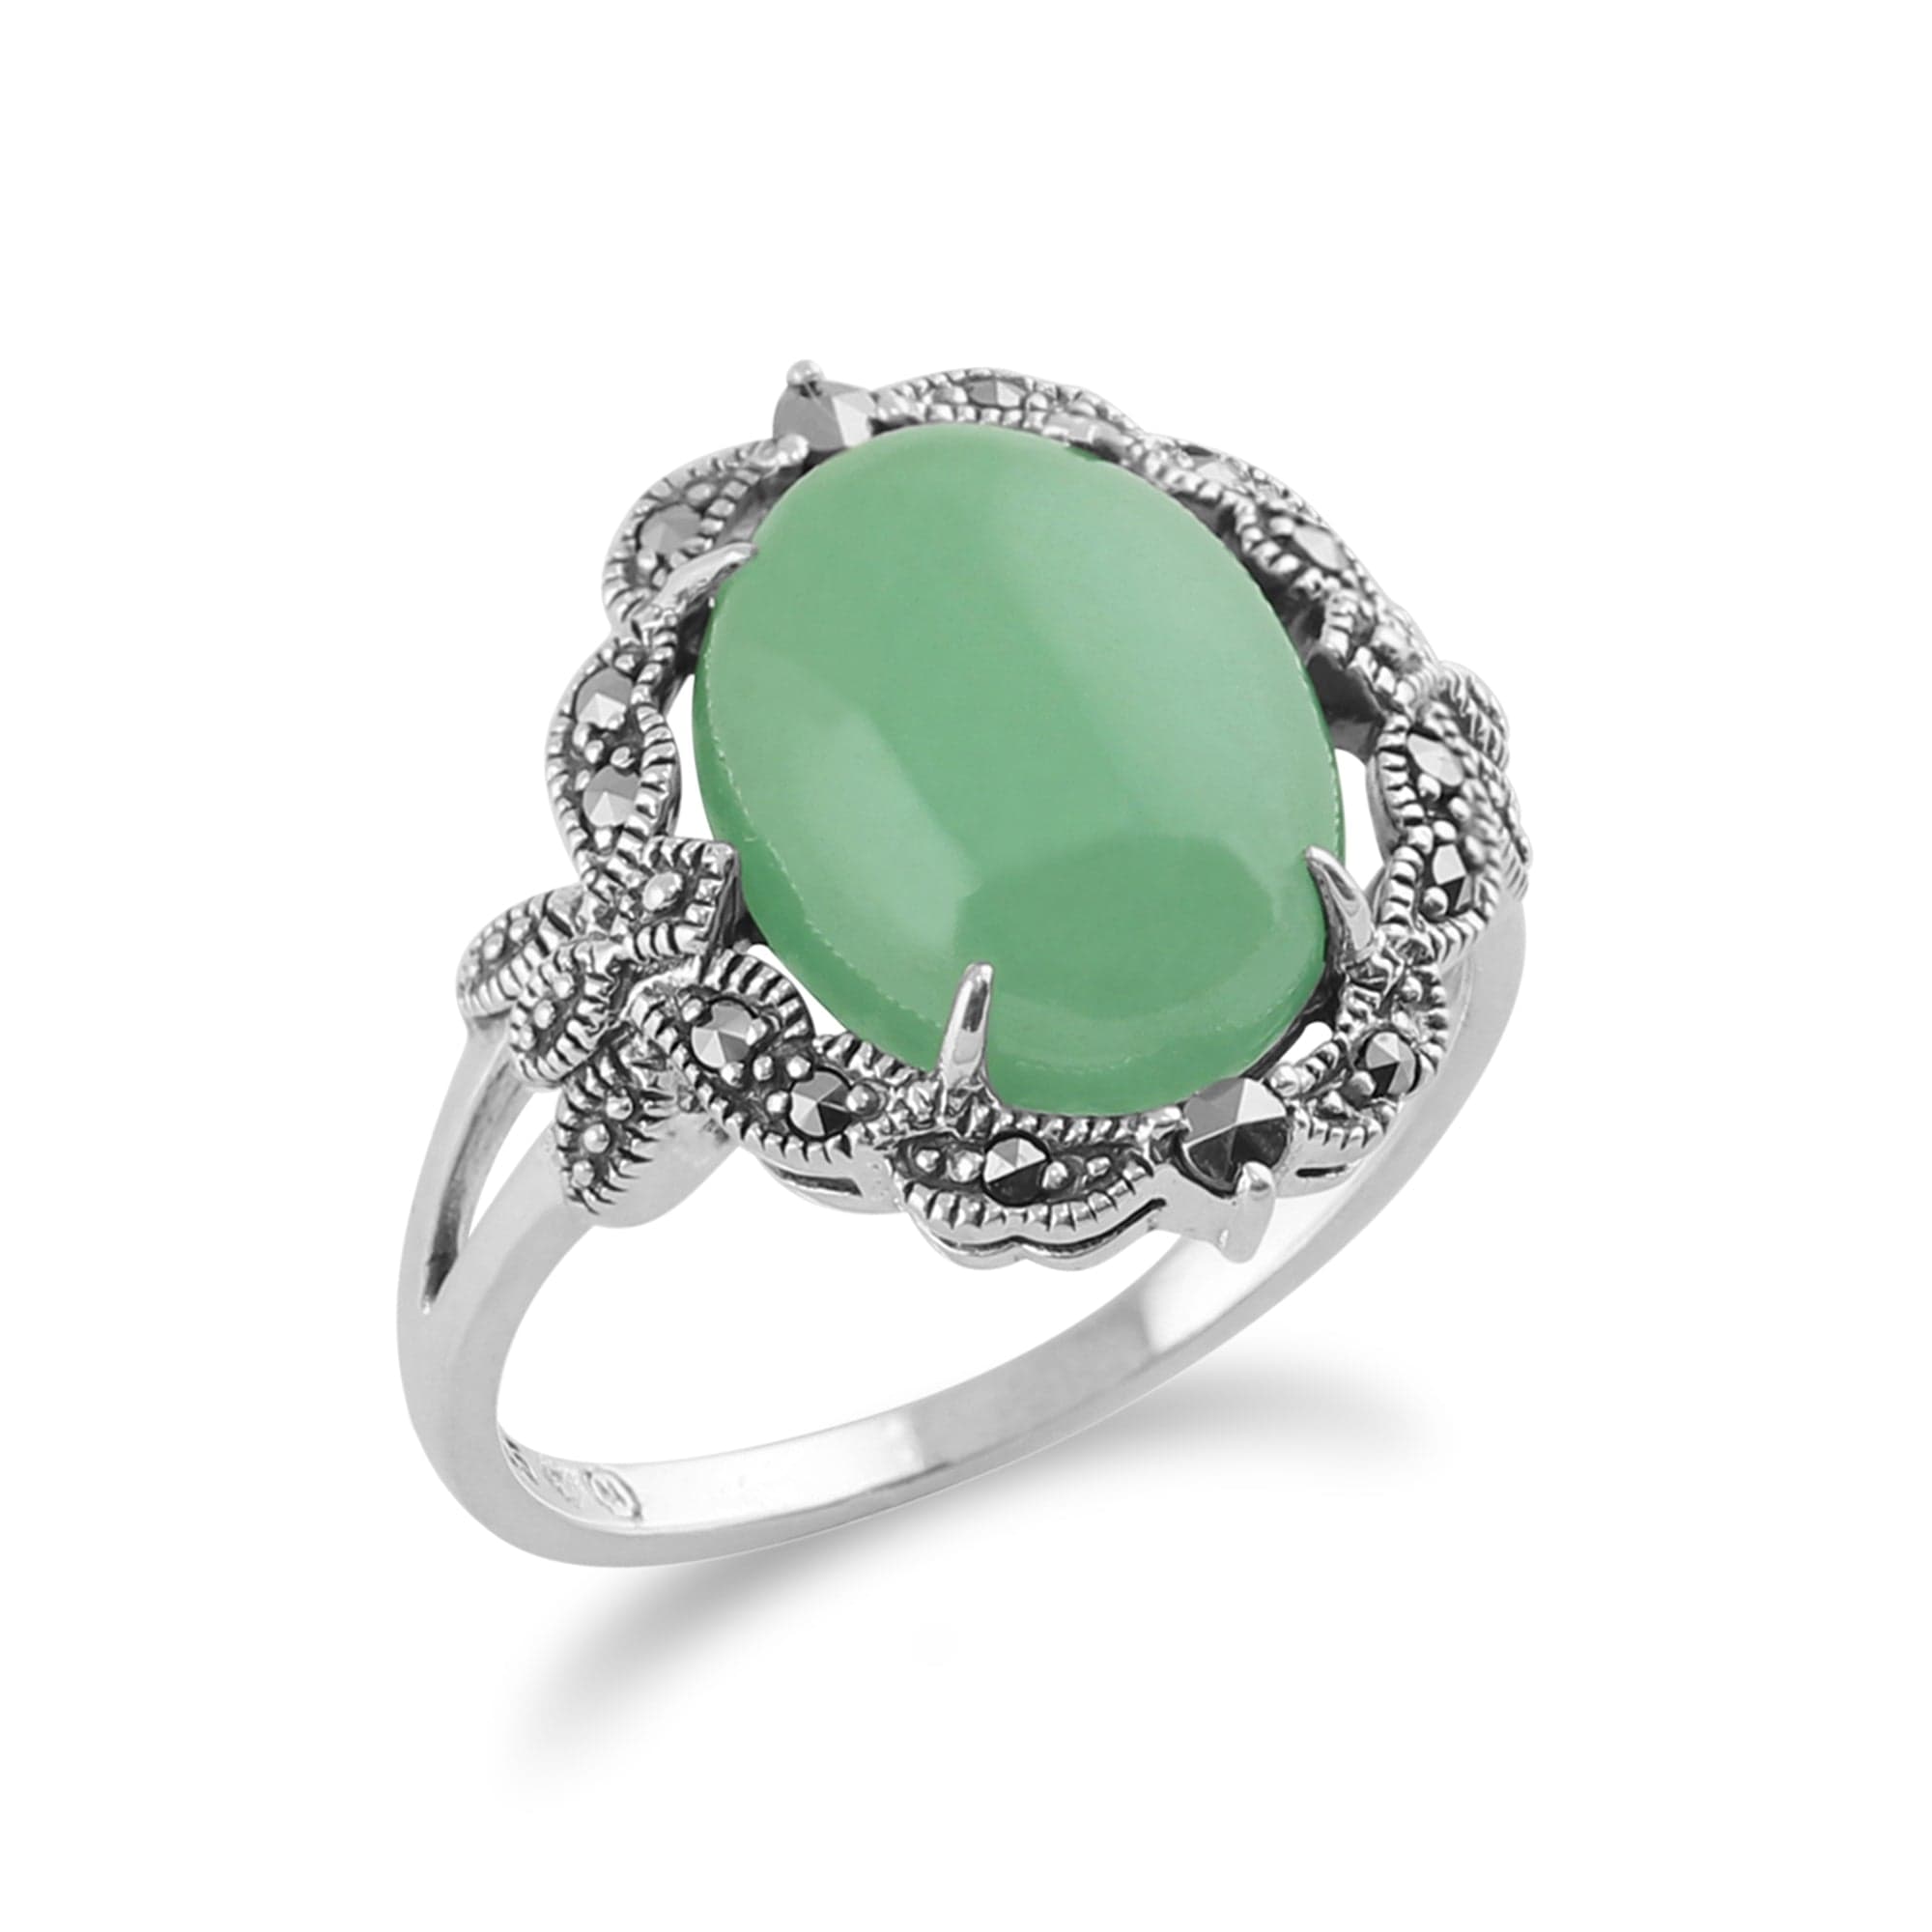 214R479208925 Art Nouveau Style Green Jade Cabochon & Marcasite Statement Ring in 925  Silver 2